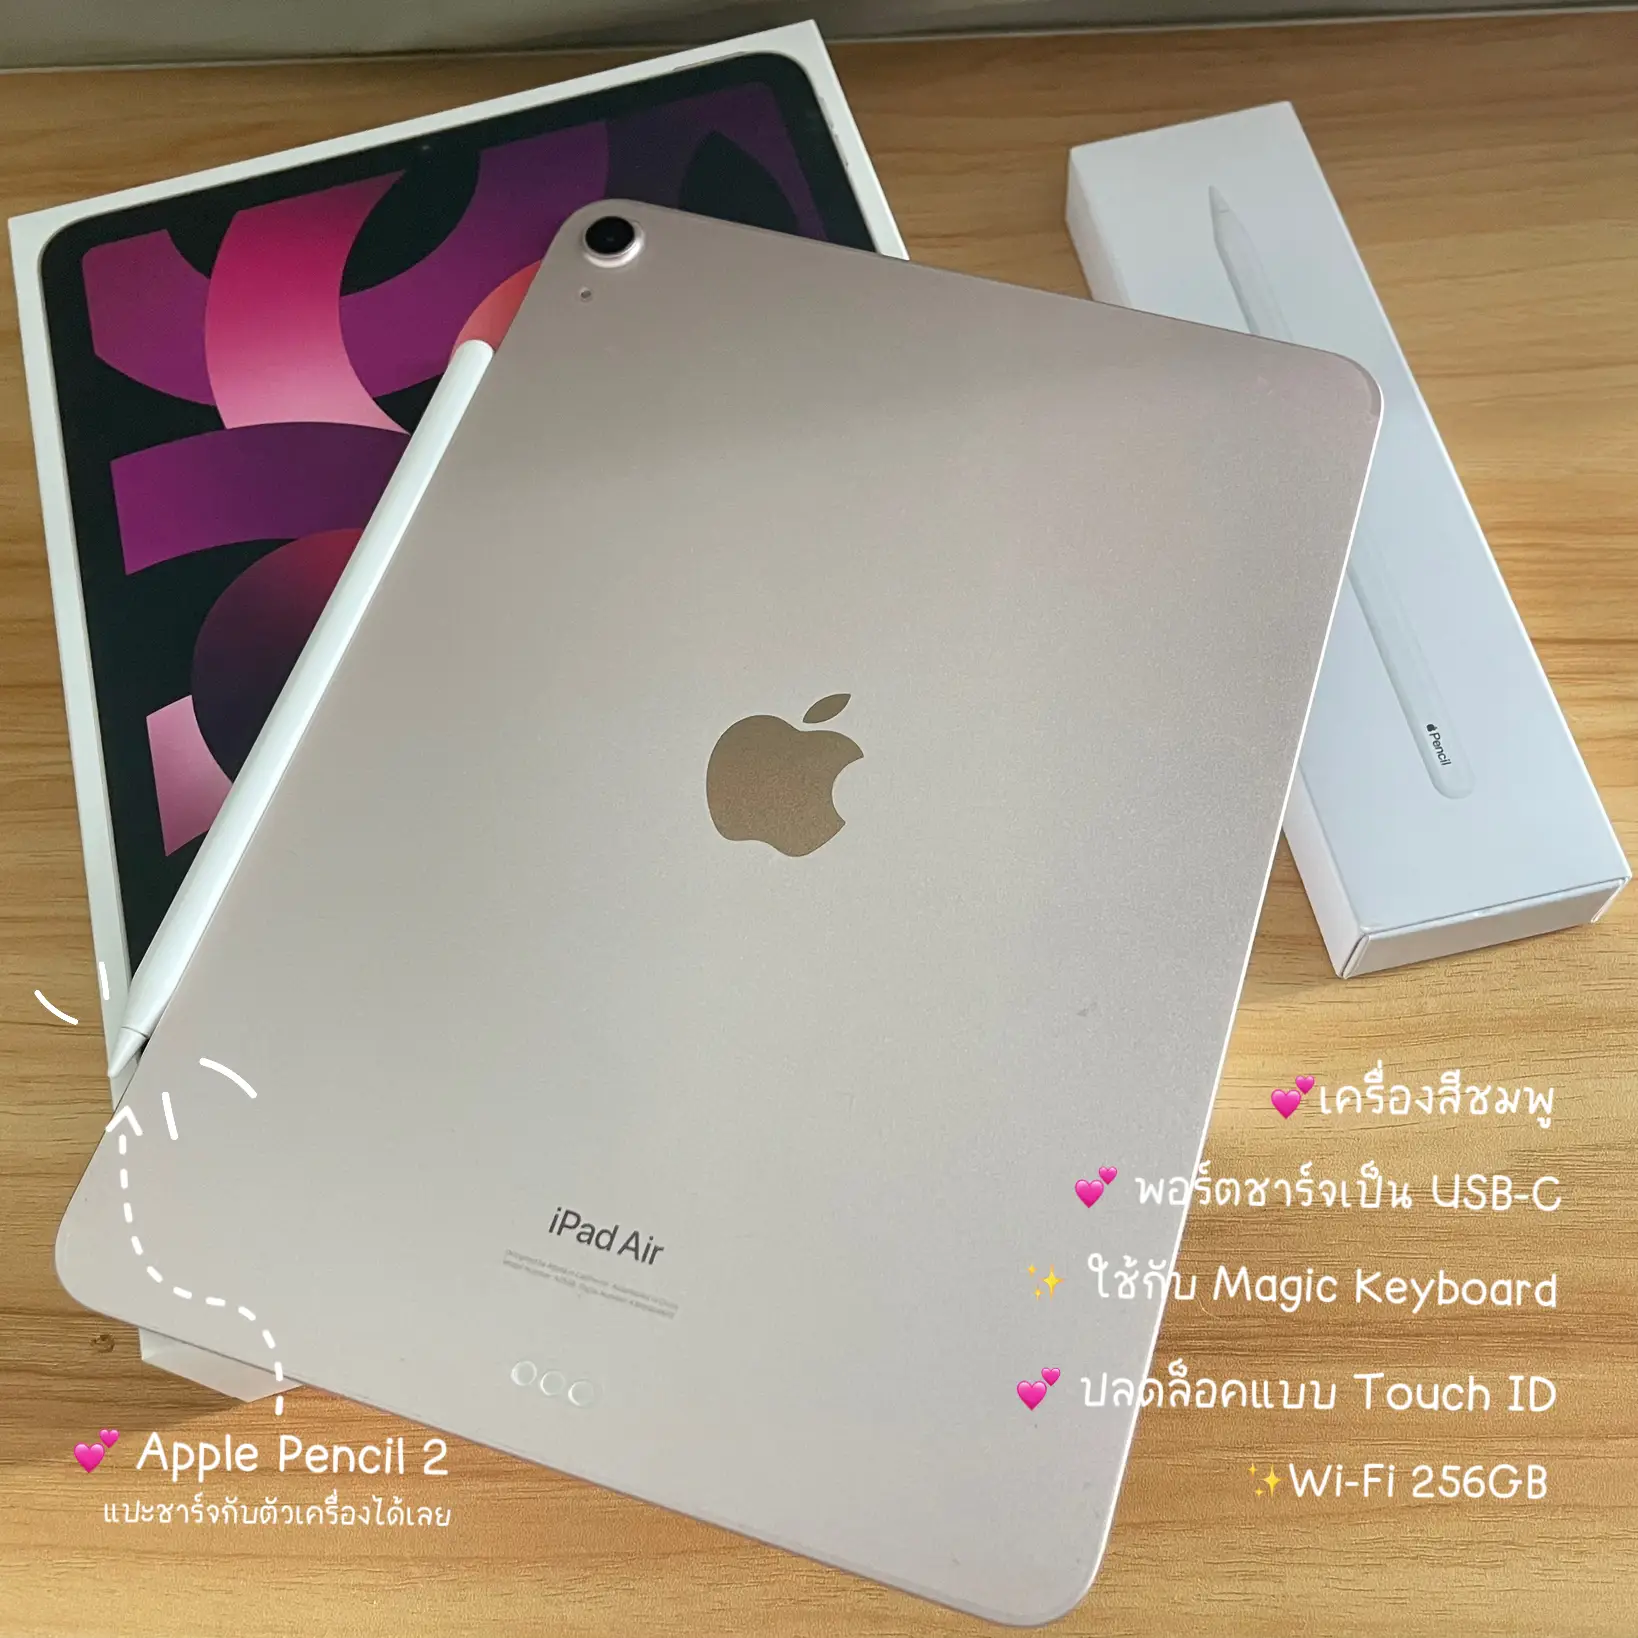 Review IPad Air5 (First in Life) | Gallery posted by Itimmmmm | Lemon8